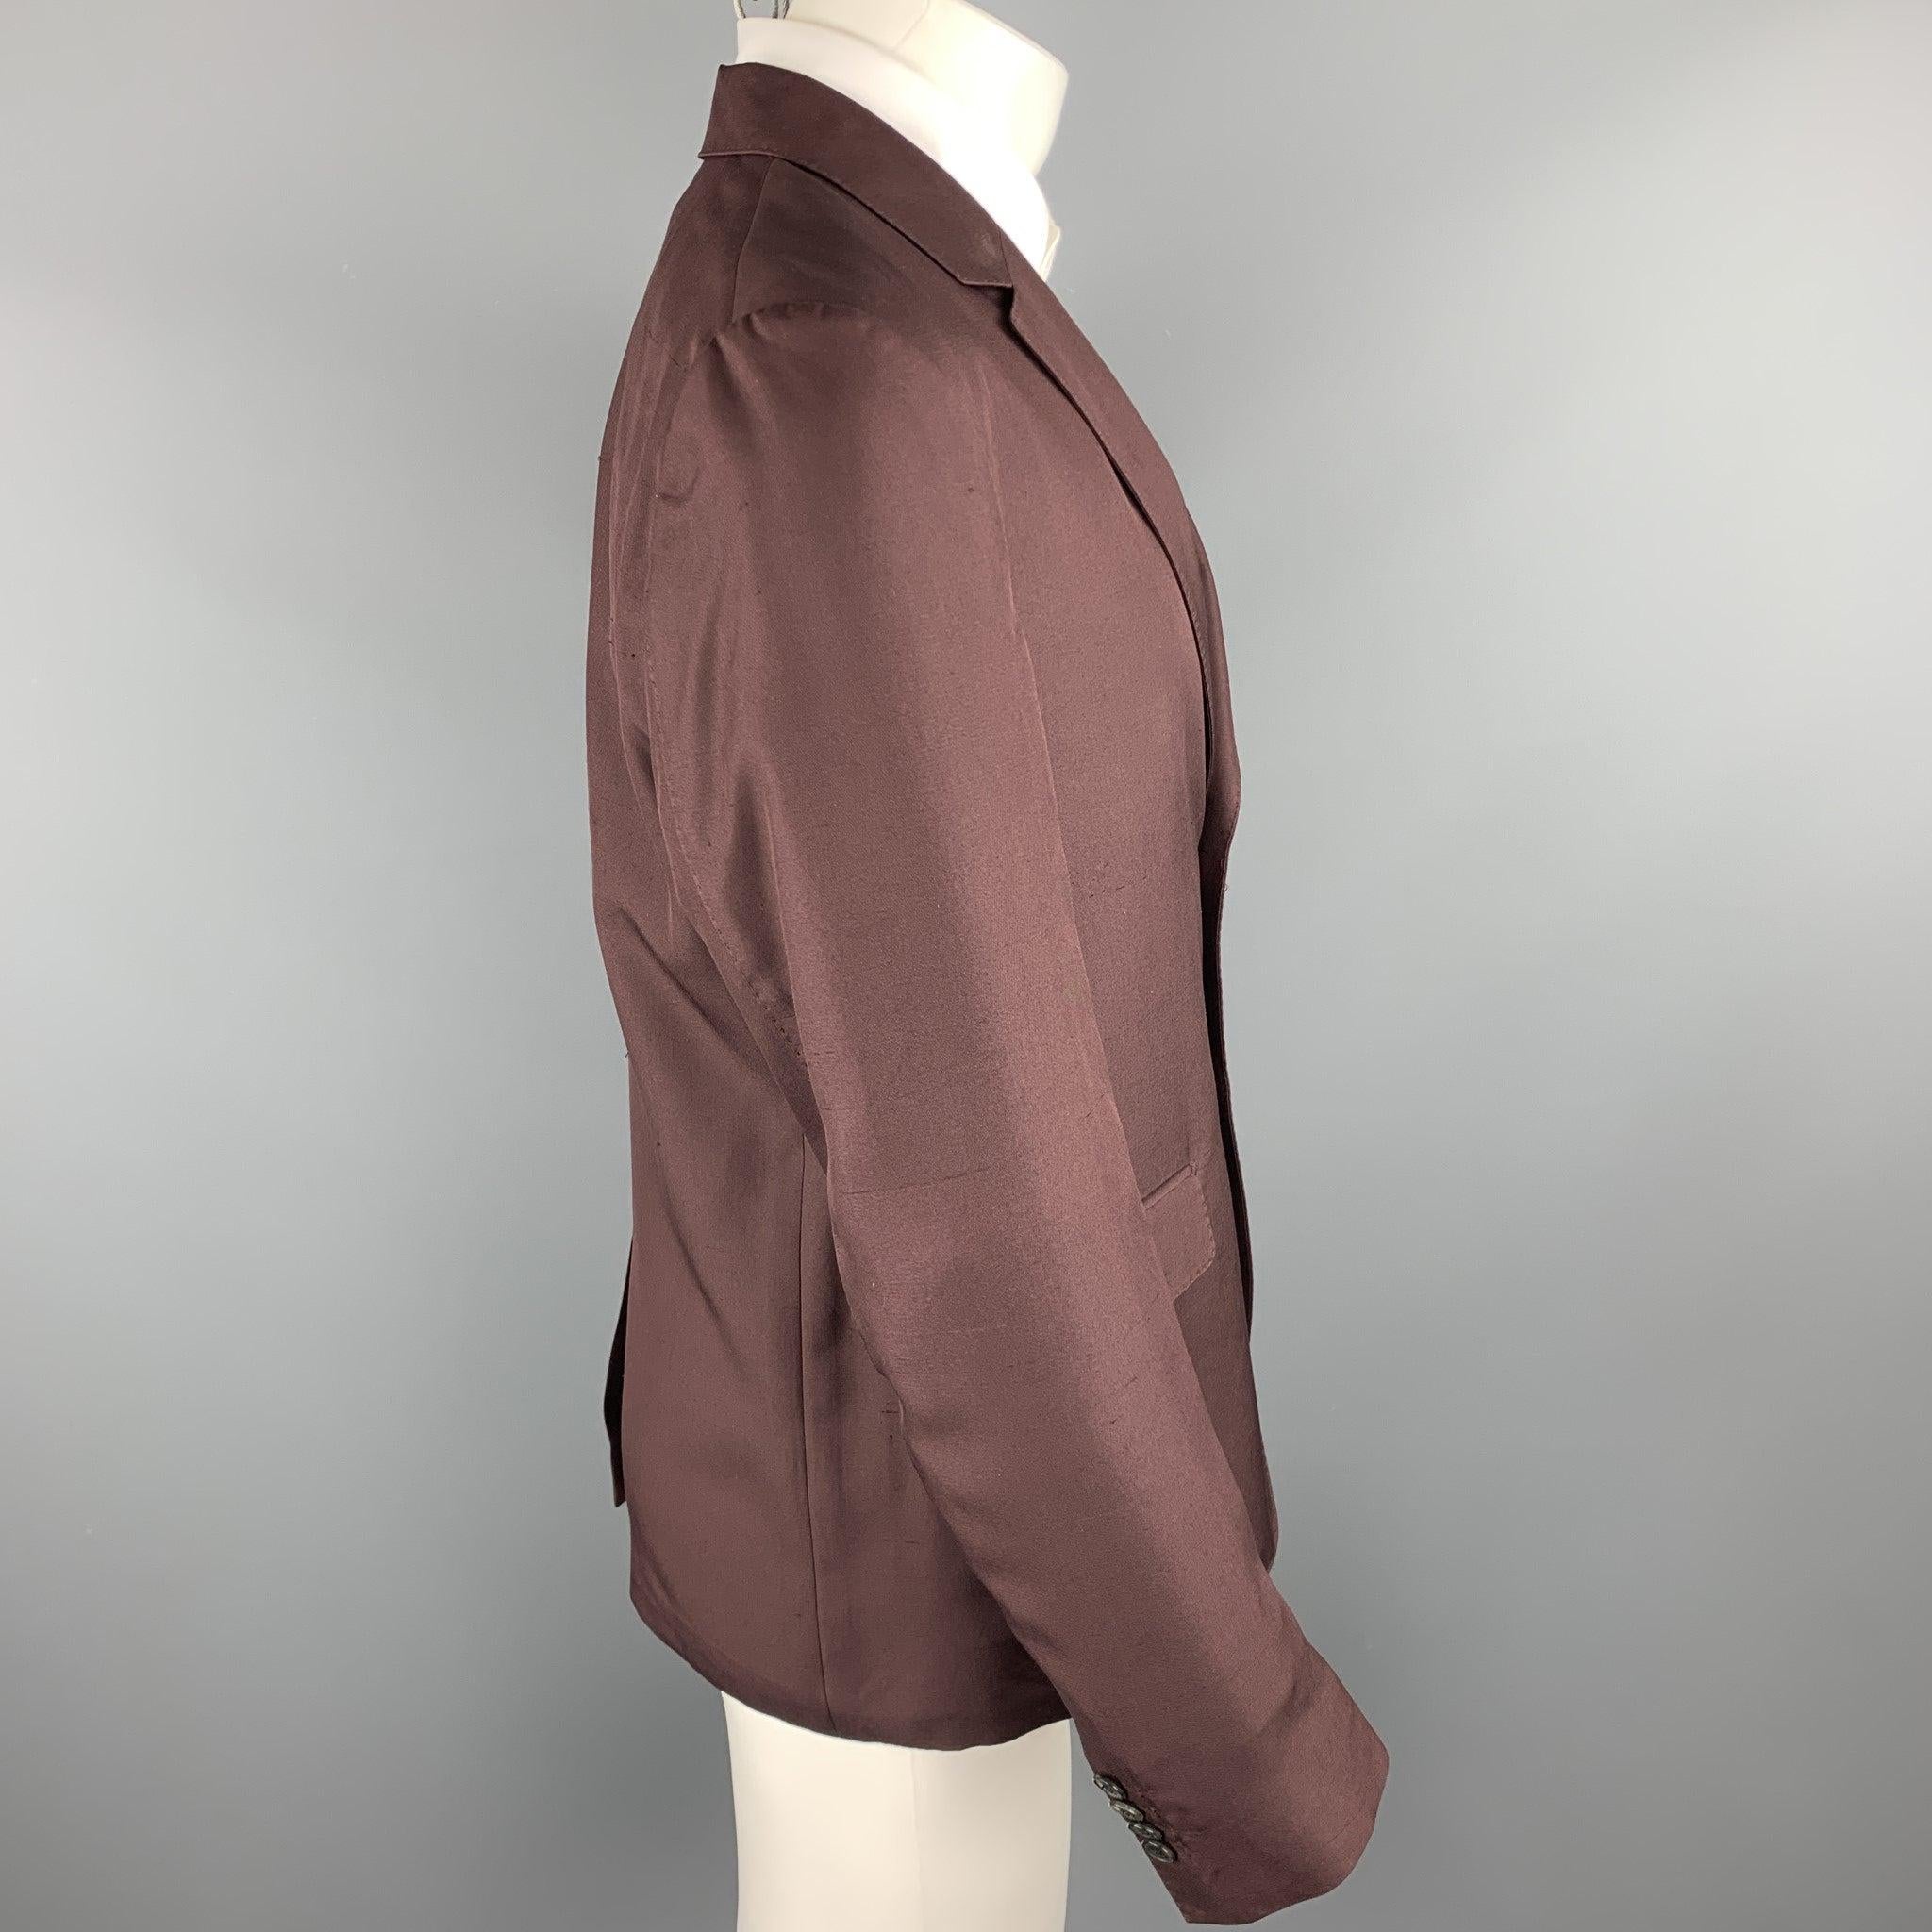 VALENTINO sport coat comes in a burgundy silk featuring a notch lapel, flap pockets, and a two button closure. Made in Italy.Excellent
Pre-Owned Condition. 

Marked:   IT 48 

Measurements: 
 
Shoulder: 17 inches Chest: 40 inches 
Sleeve: 26.5